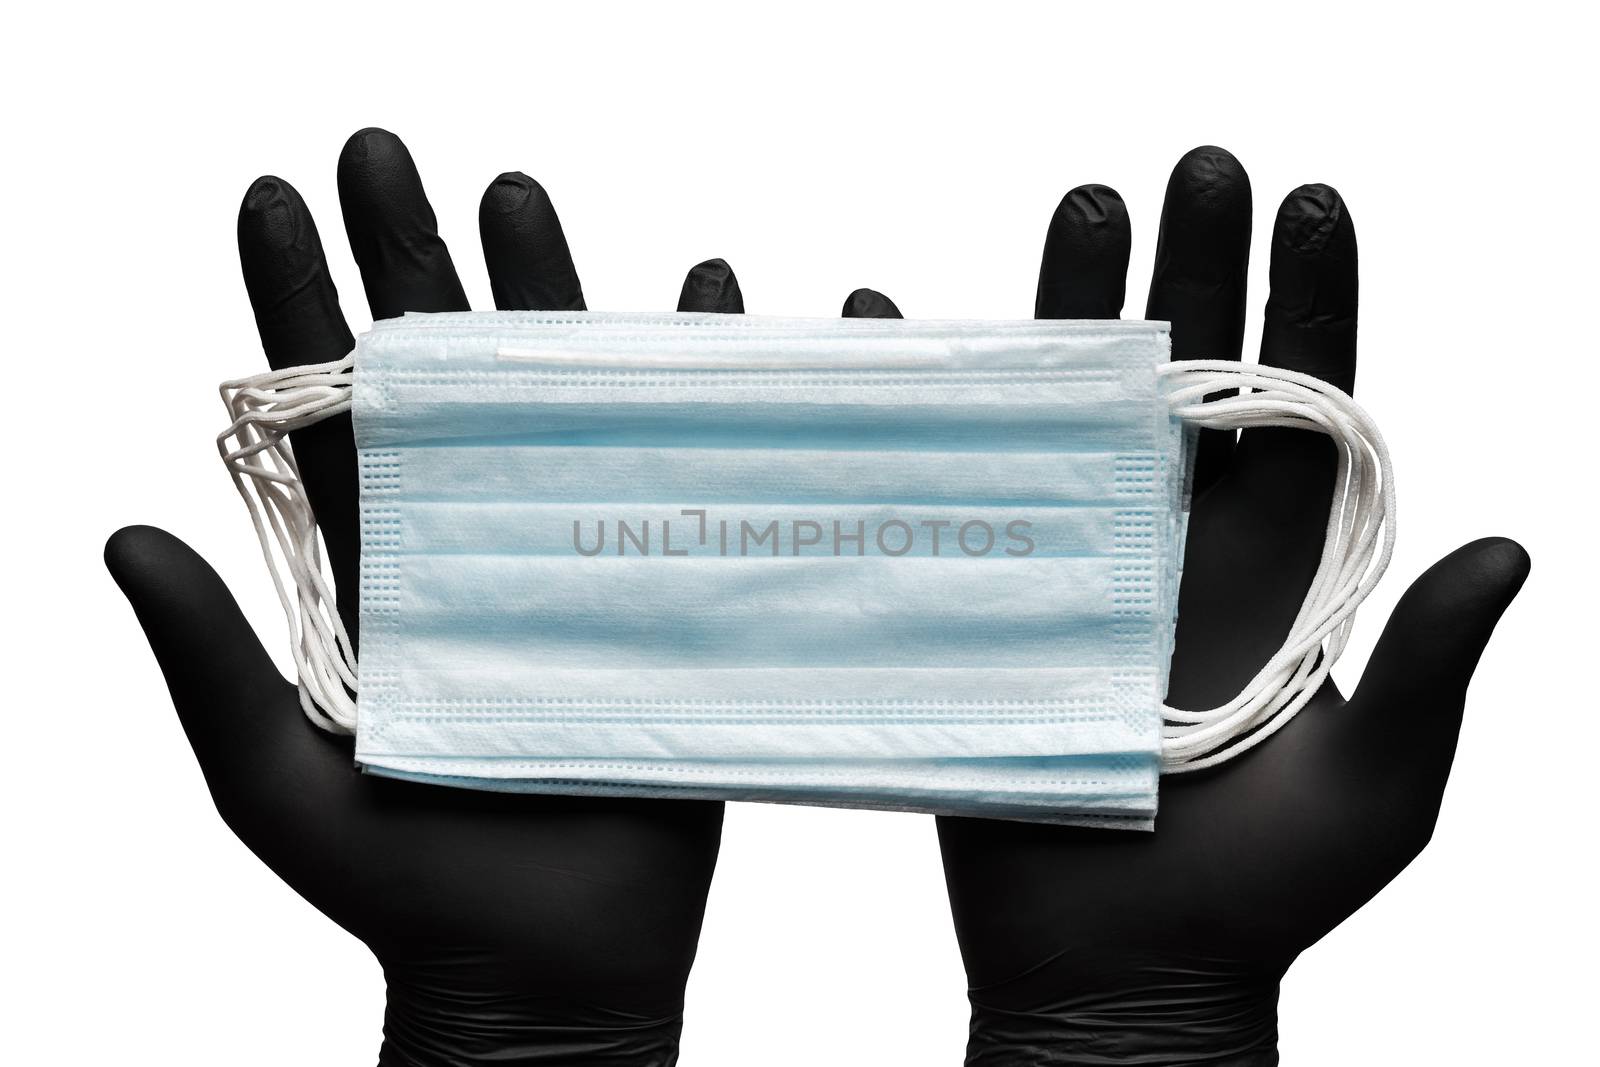 Doctor holds lot surgical face masks in two hands in black medical gloves. Isolated on white background. Concept coronavirus quarantine, pandemic outbreak. Medical respiratory bandage for human face.